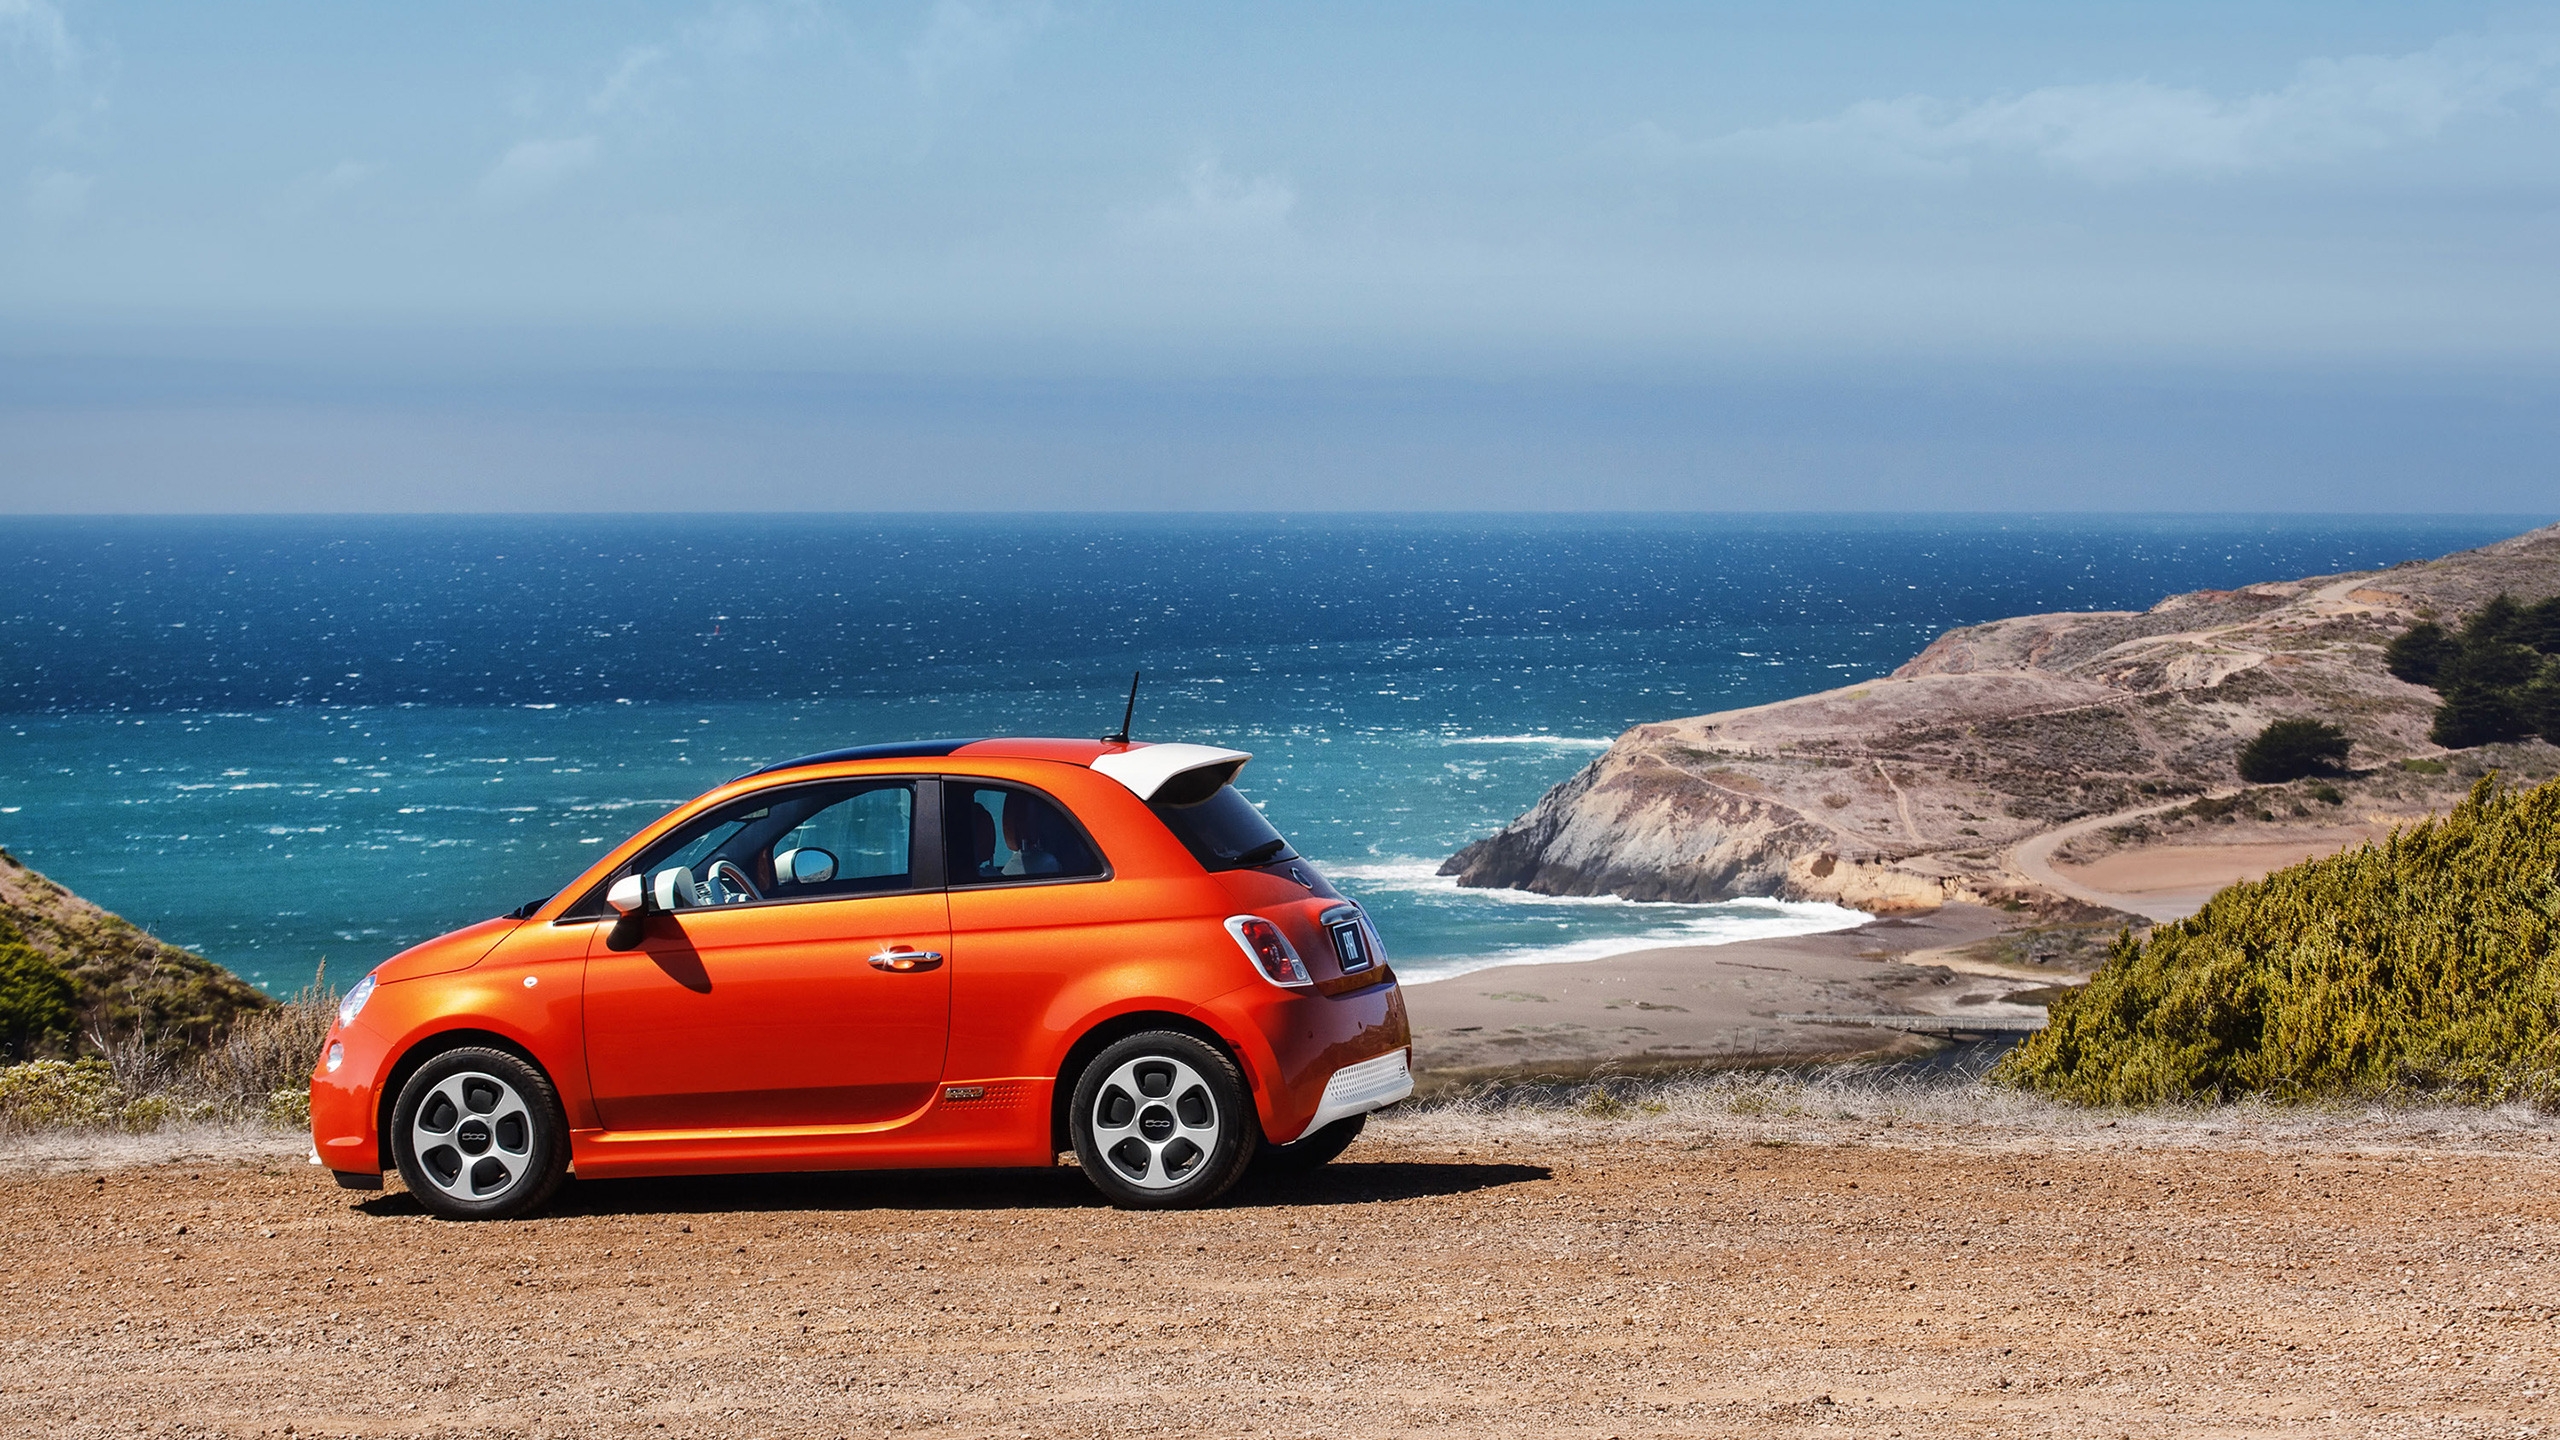 Fiat 500 at Sea for 2560x1440 HDTV resolution